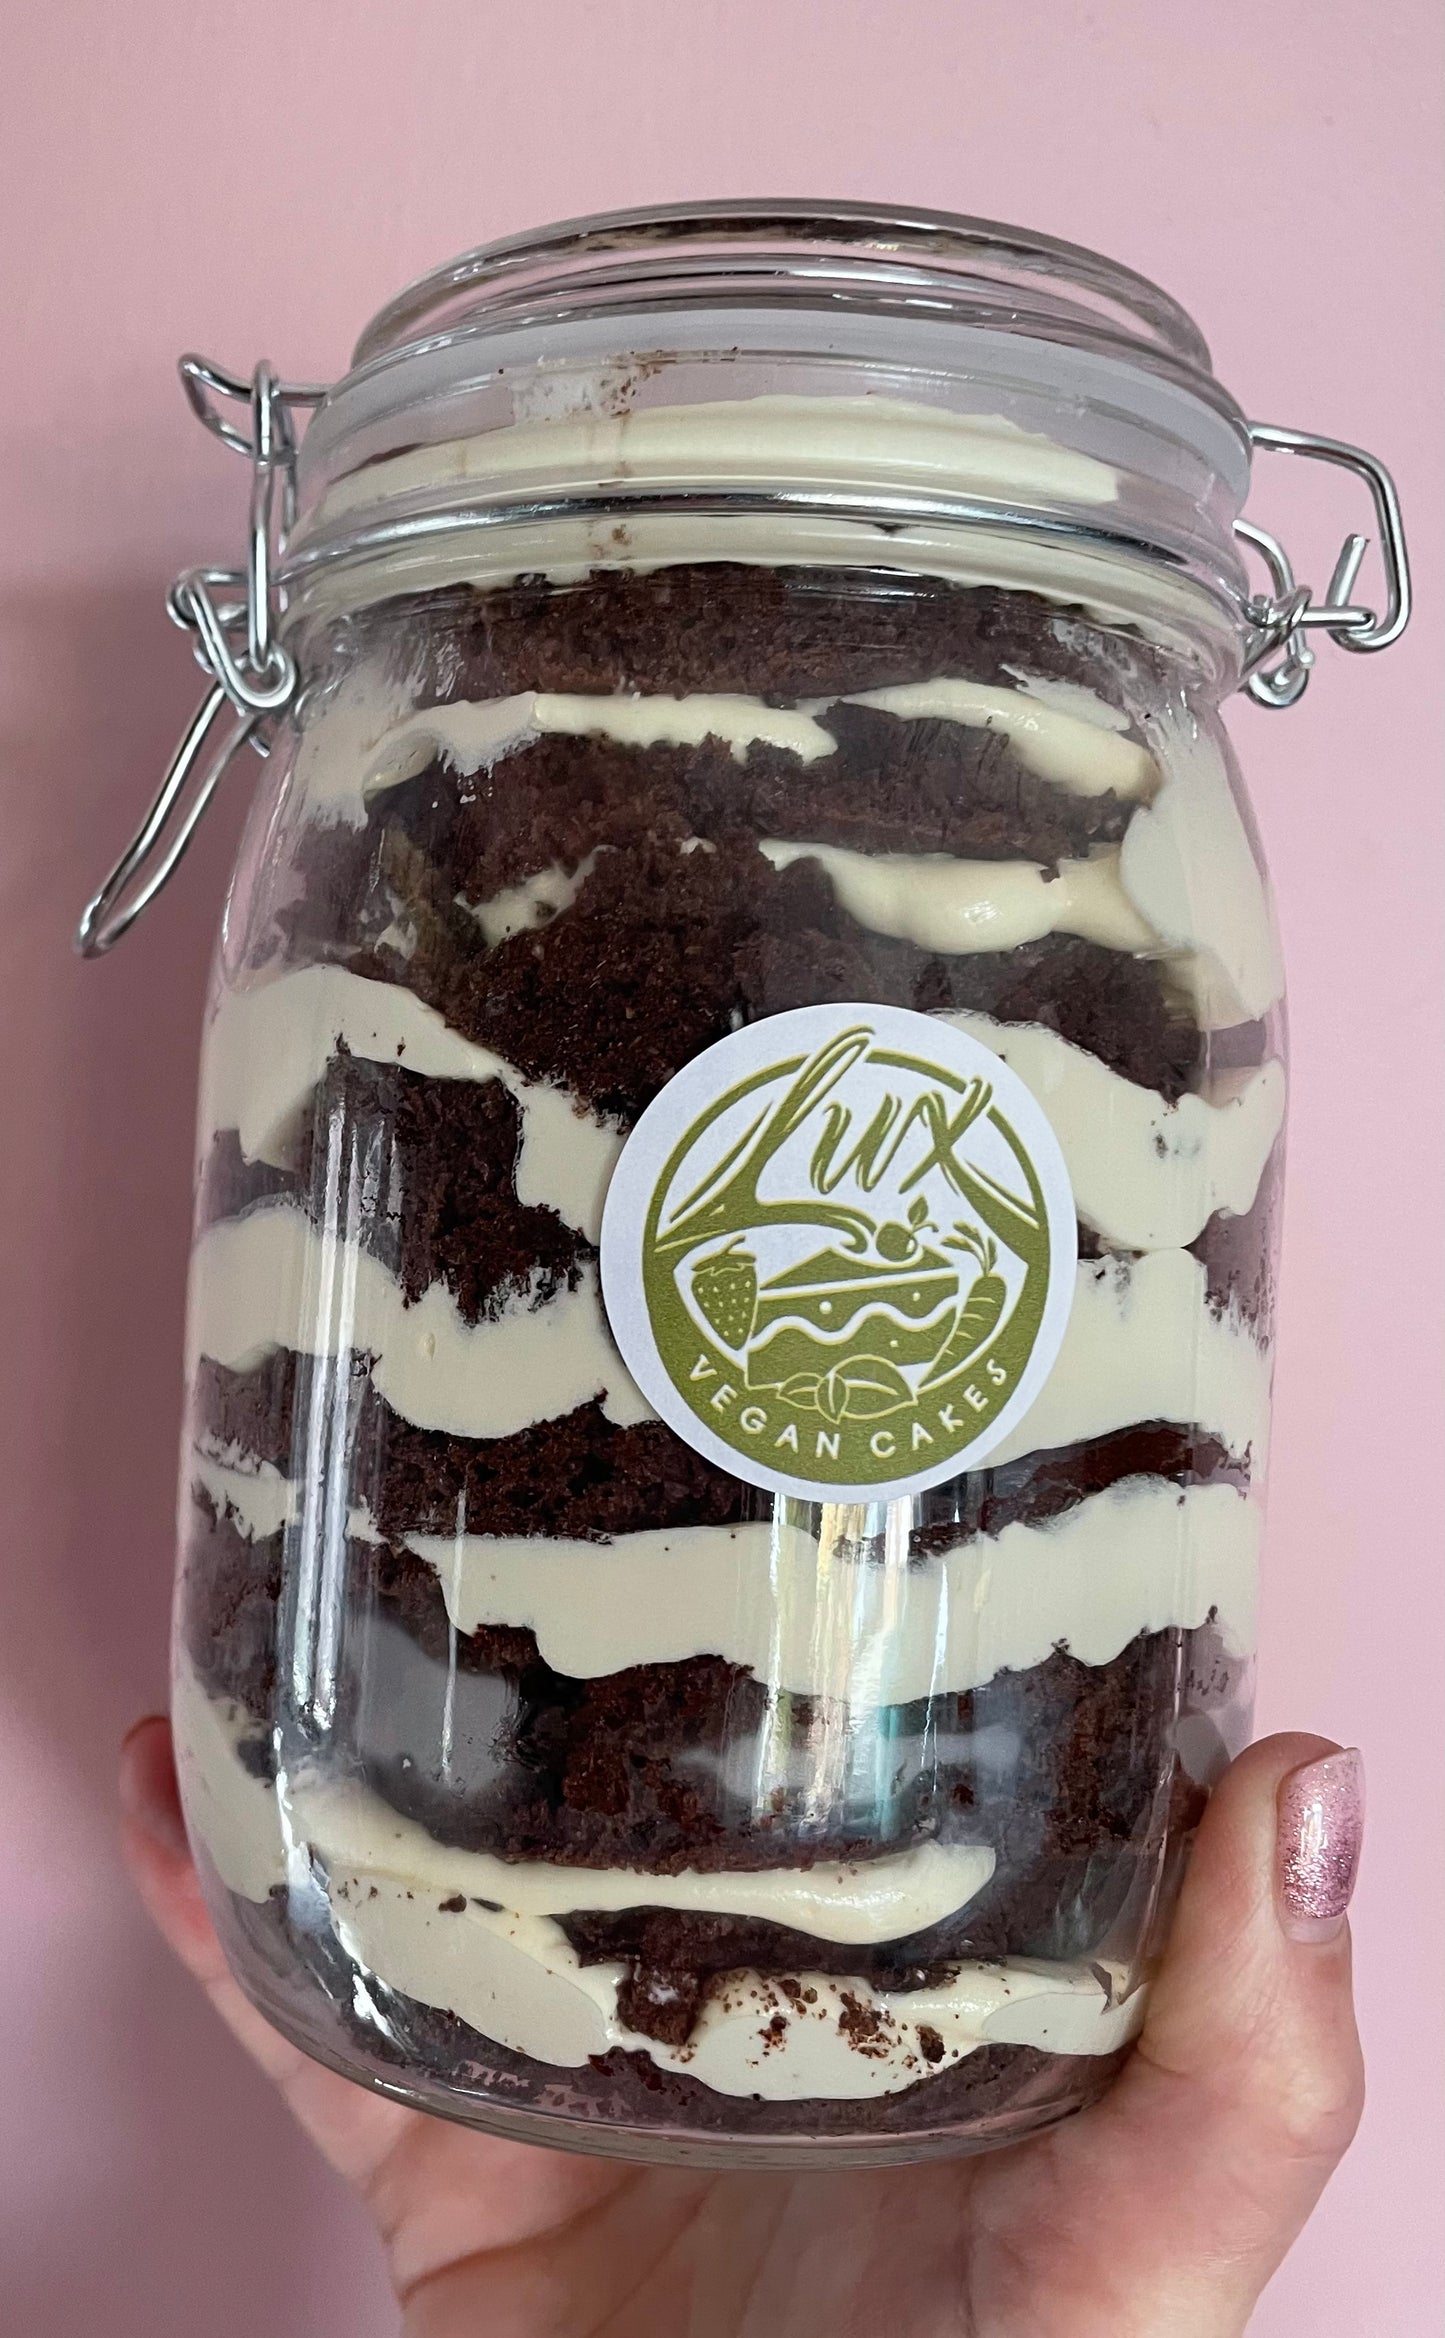 XL Cookies and cream Cake in a Jar